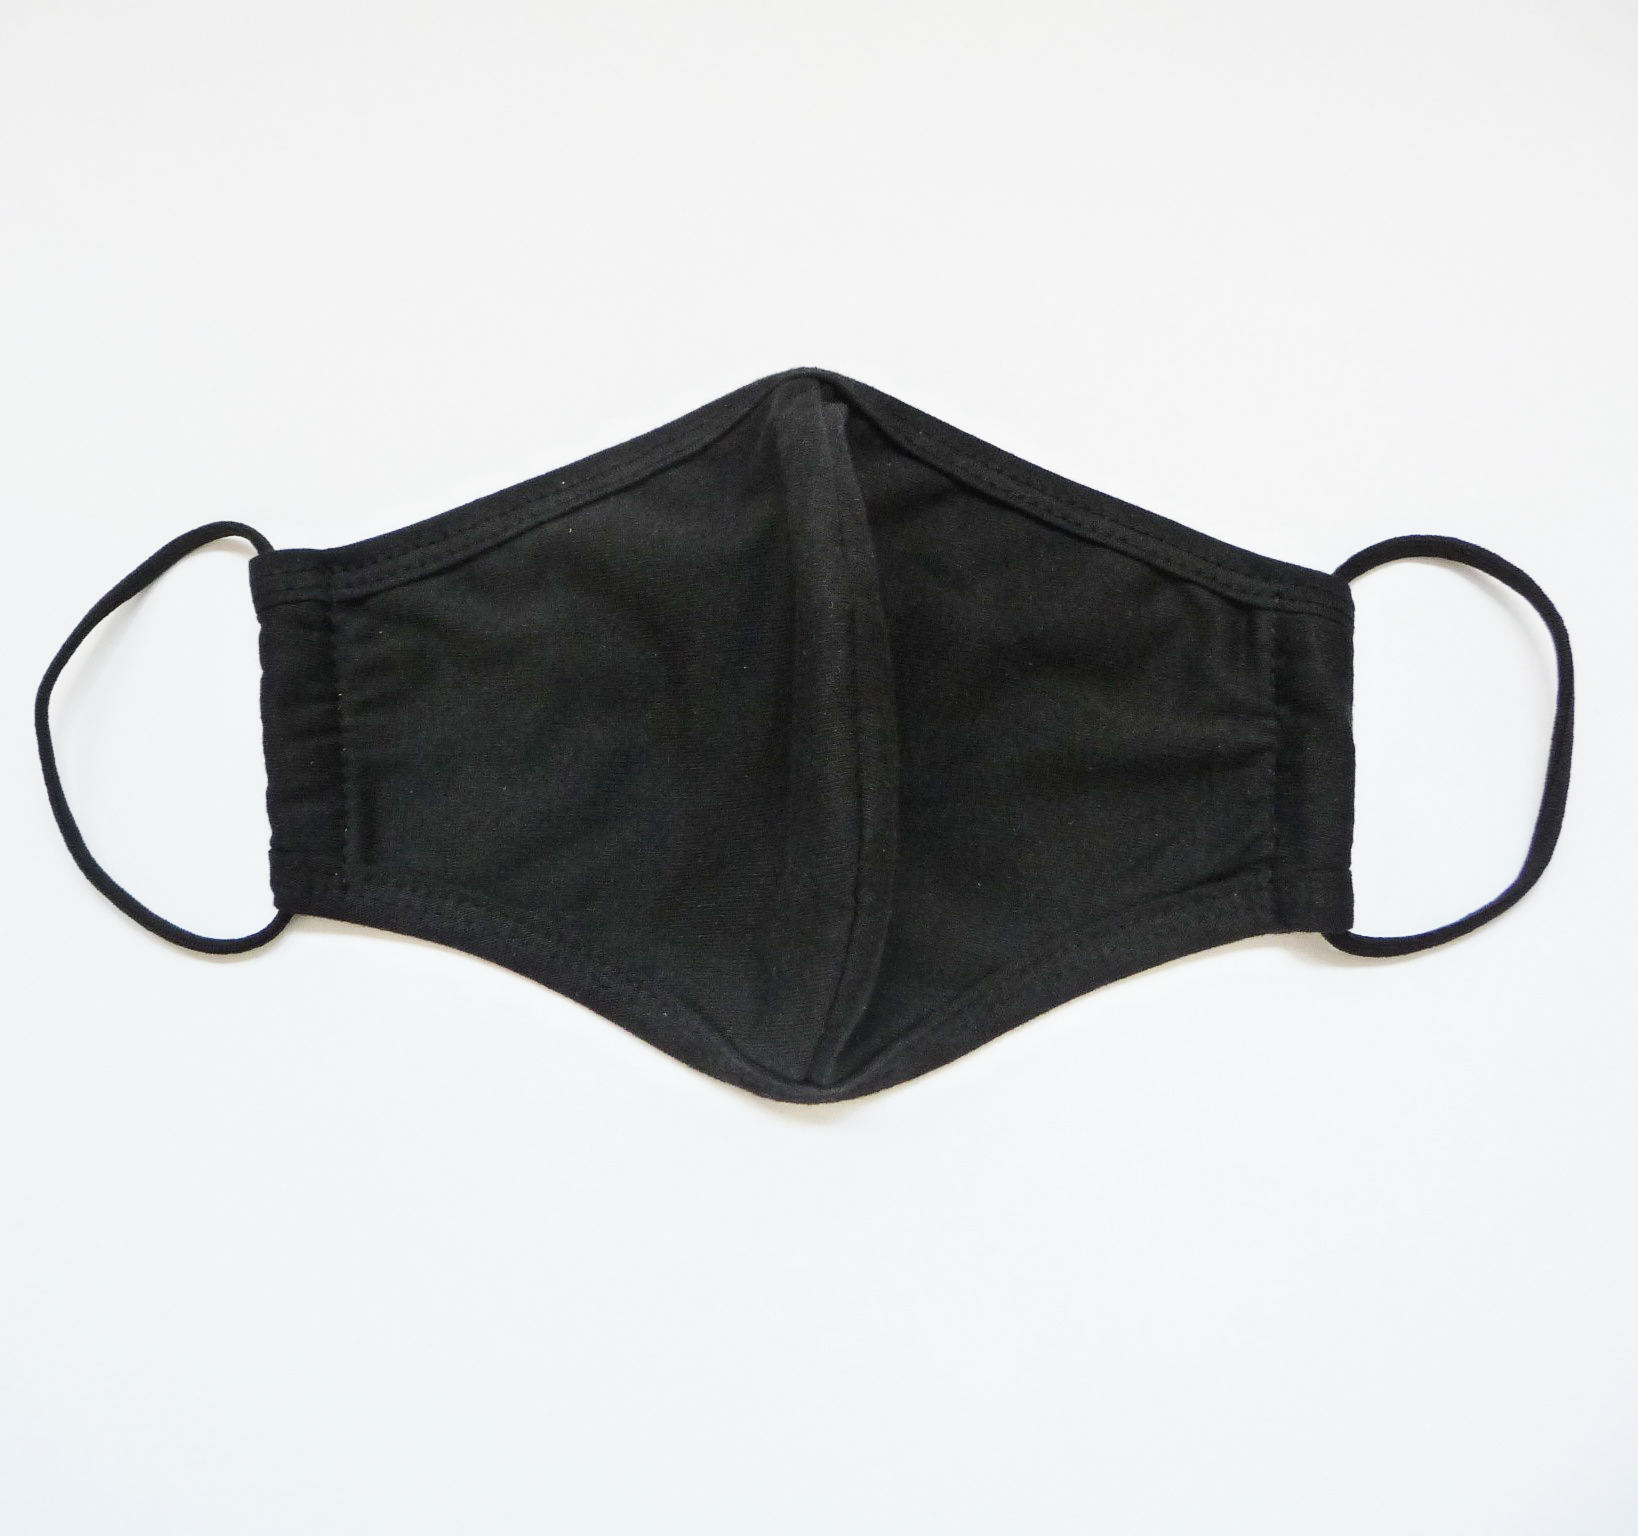 16648: Fabric Face Masks with PM2.5 Filter pocket - Reusable & Washable